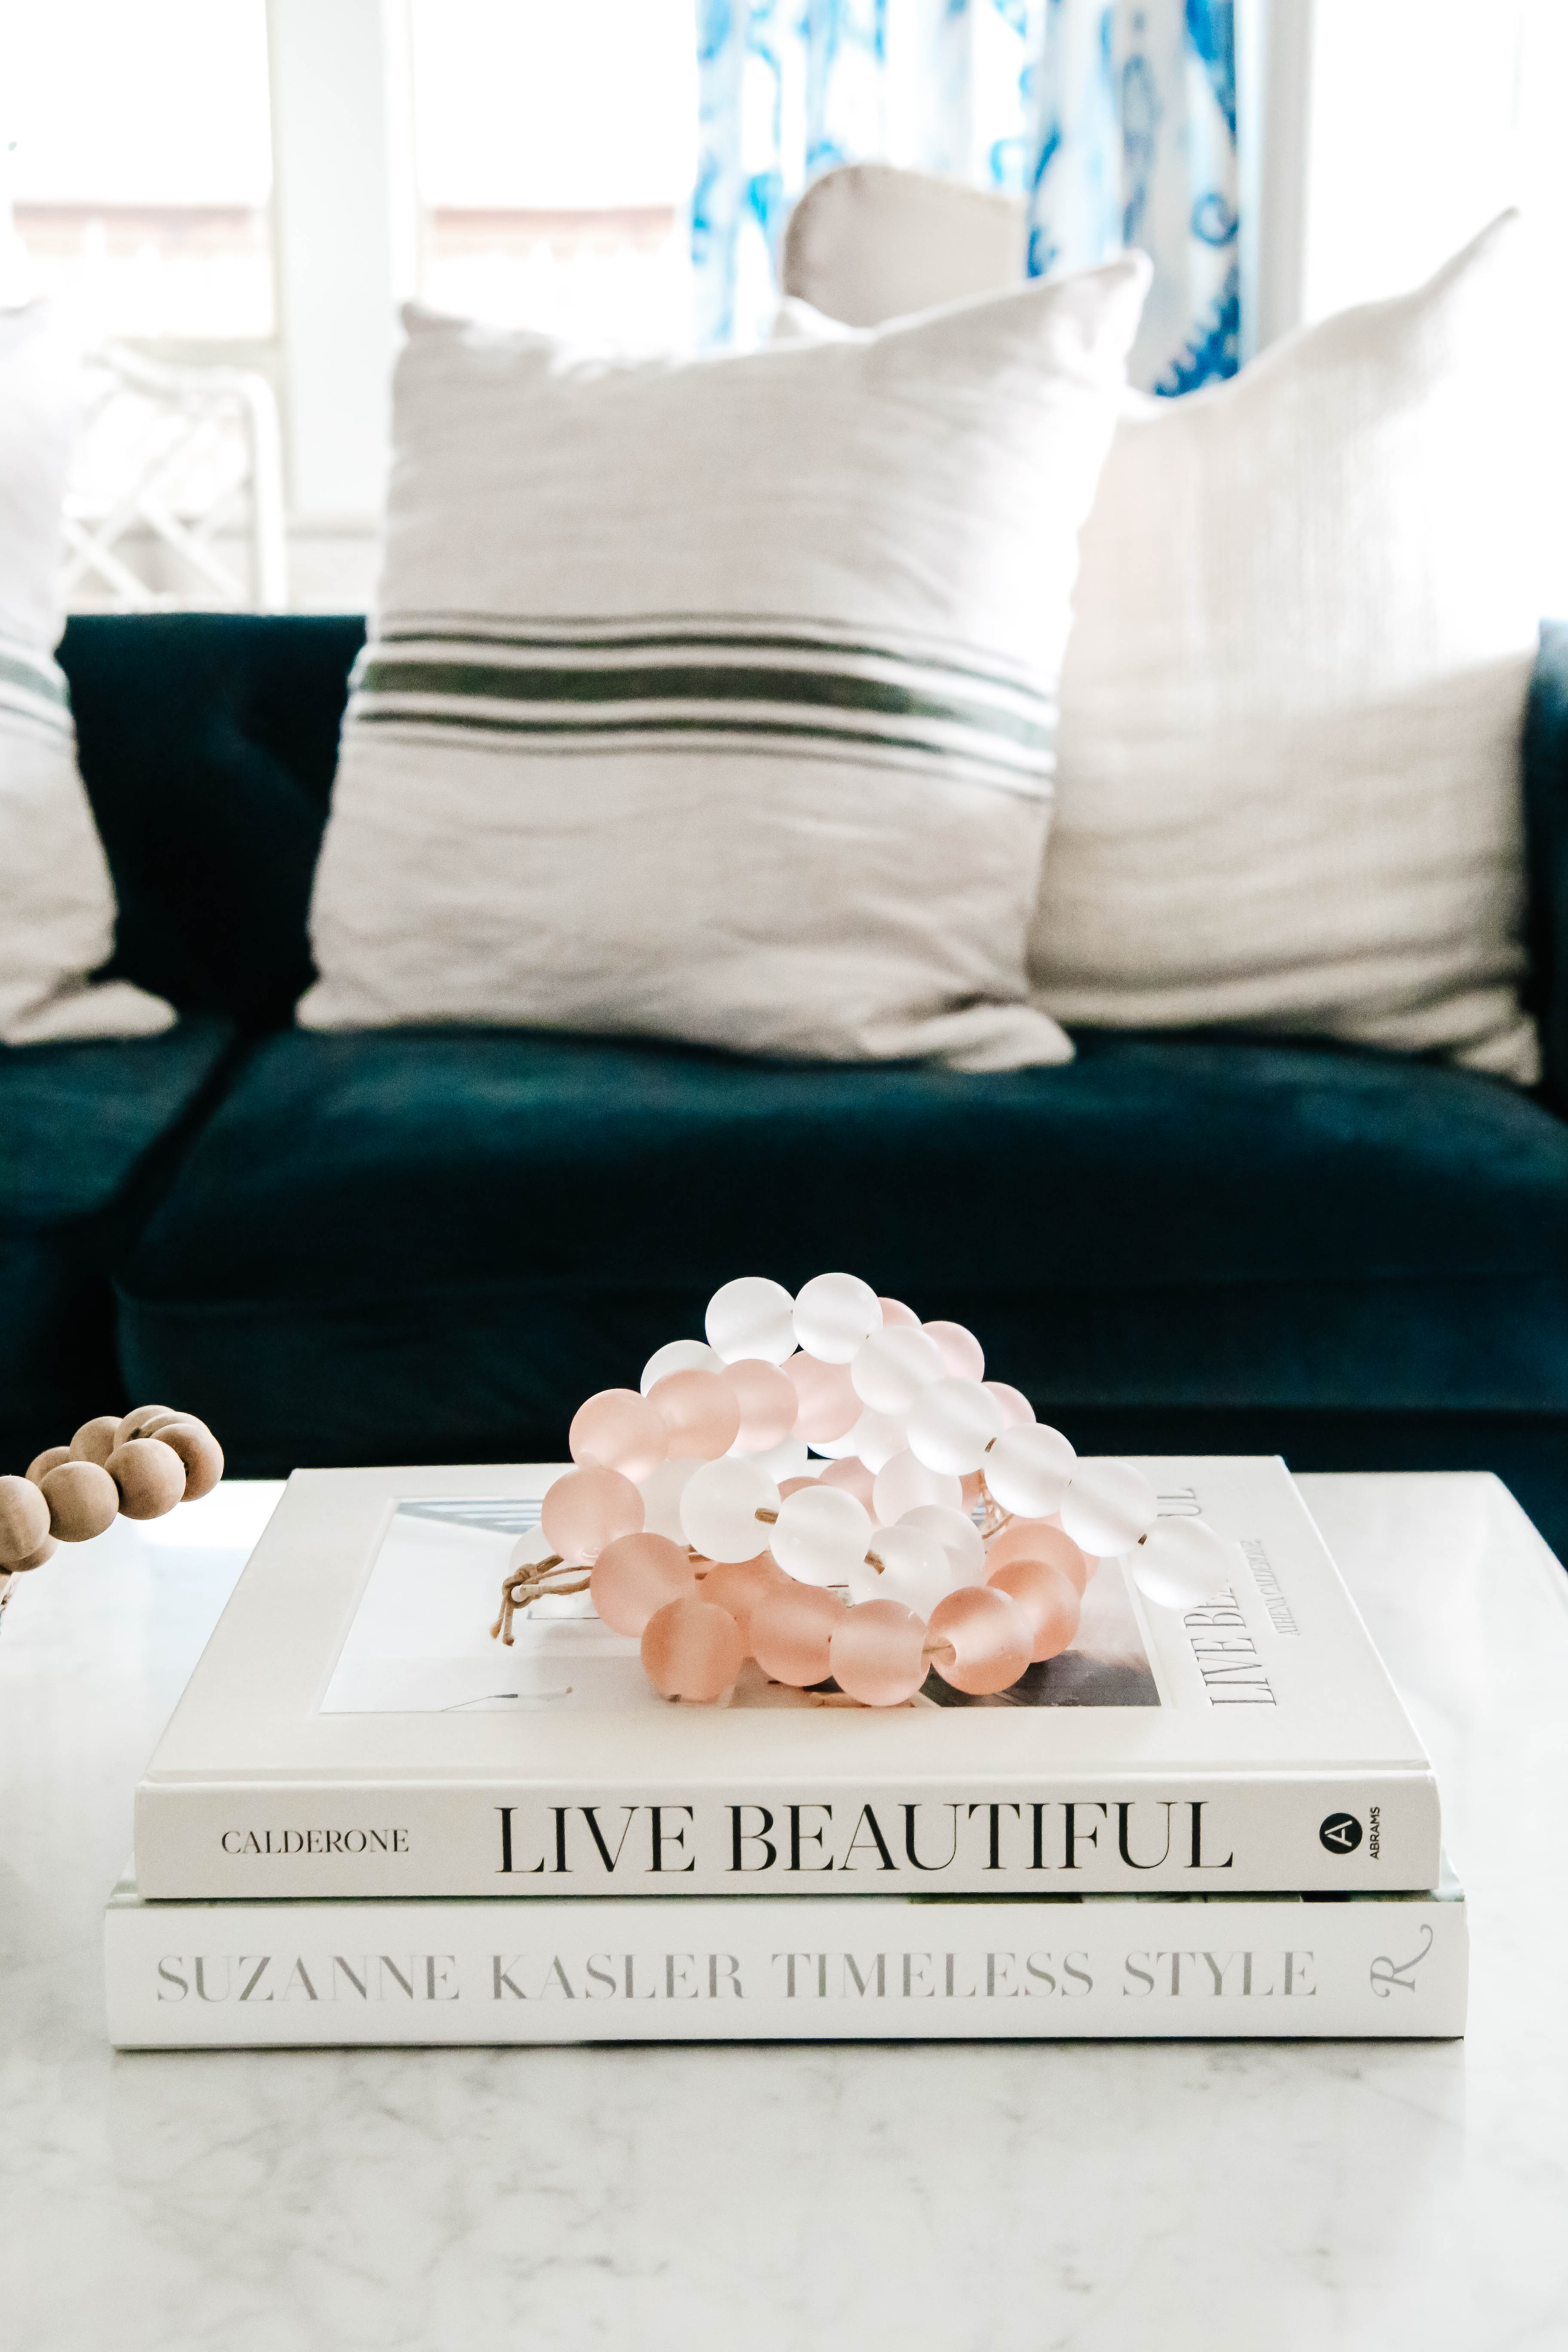 How To Style Throw Pillows, A Blissful Nest